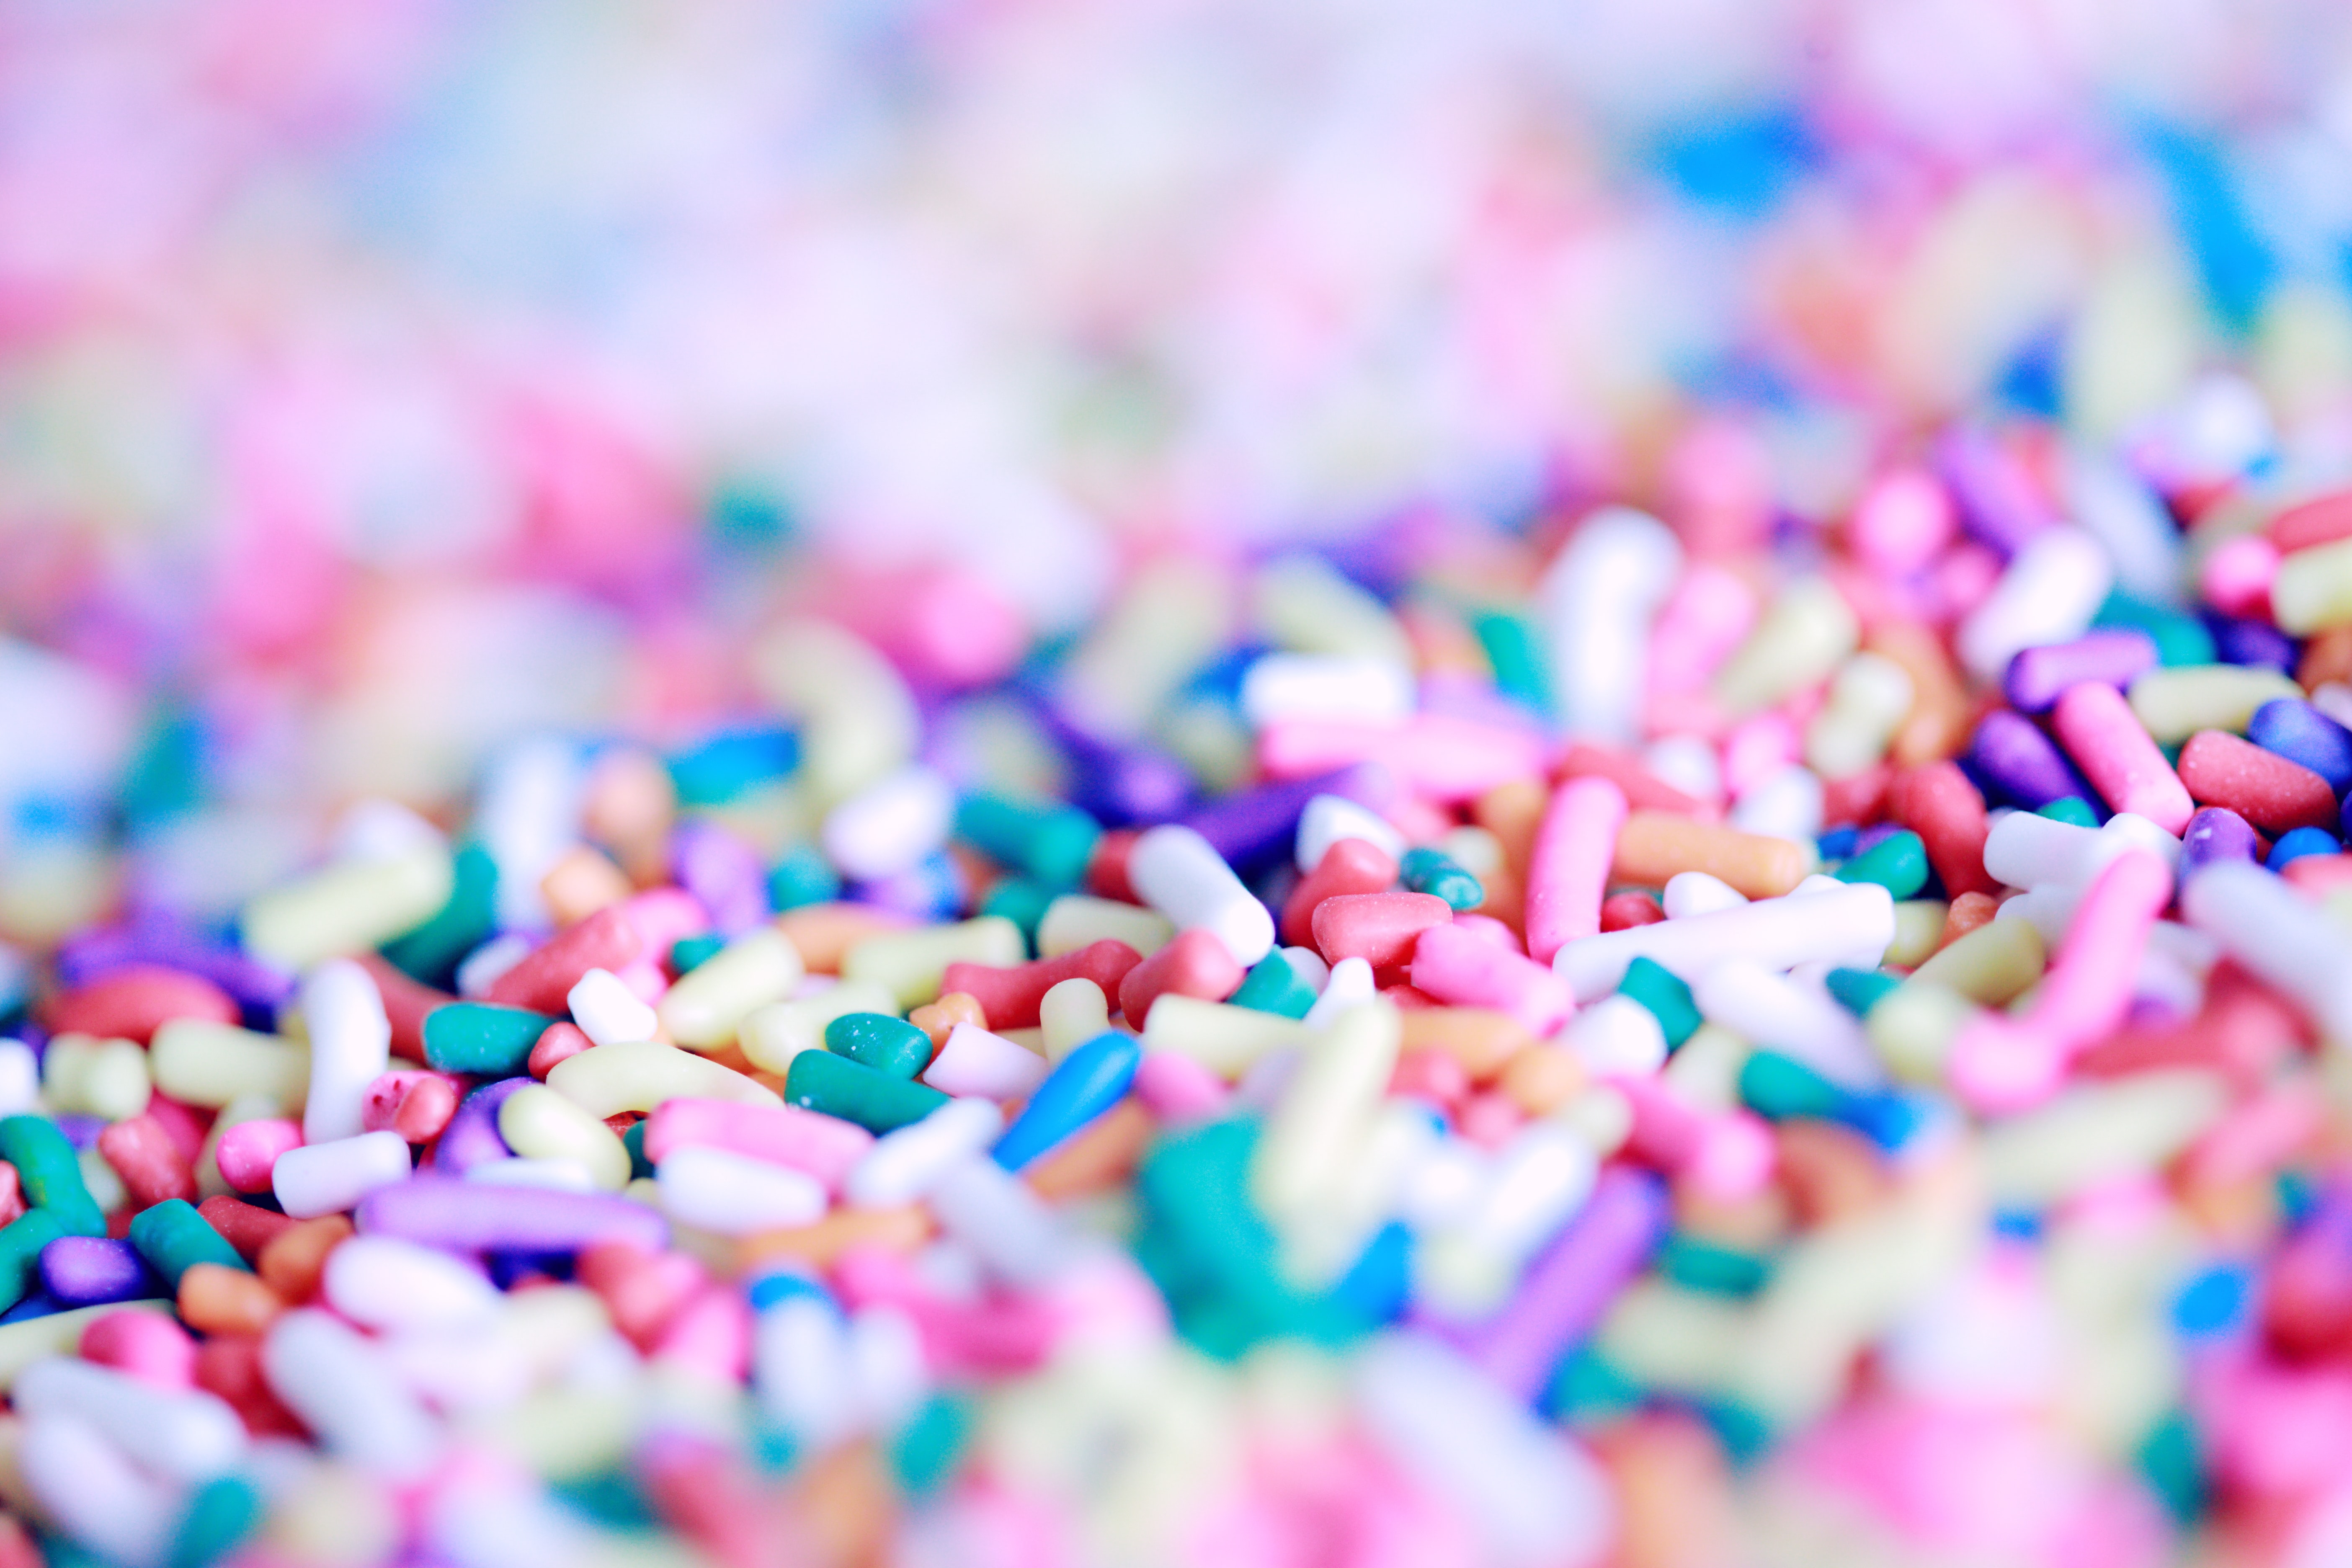 candy wallpaper hd,sprinkles,nonpareils,pink,sweetness,confectionery